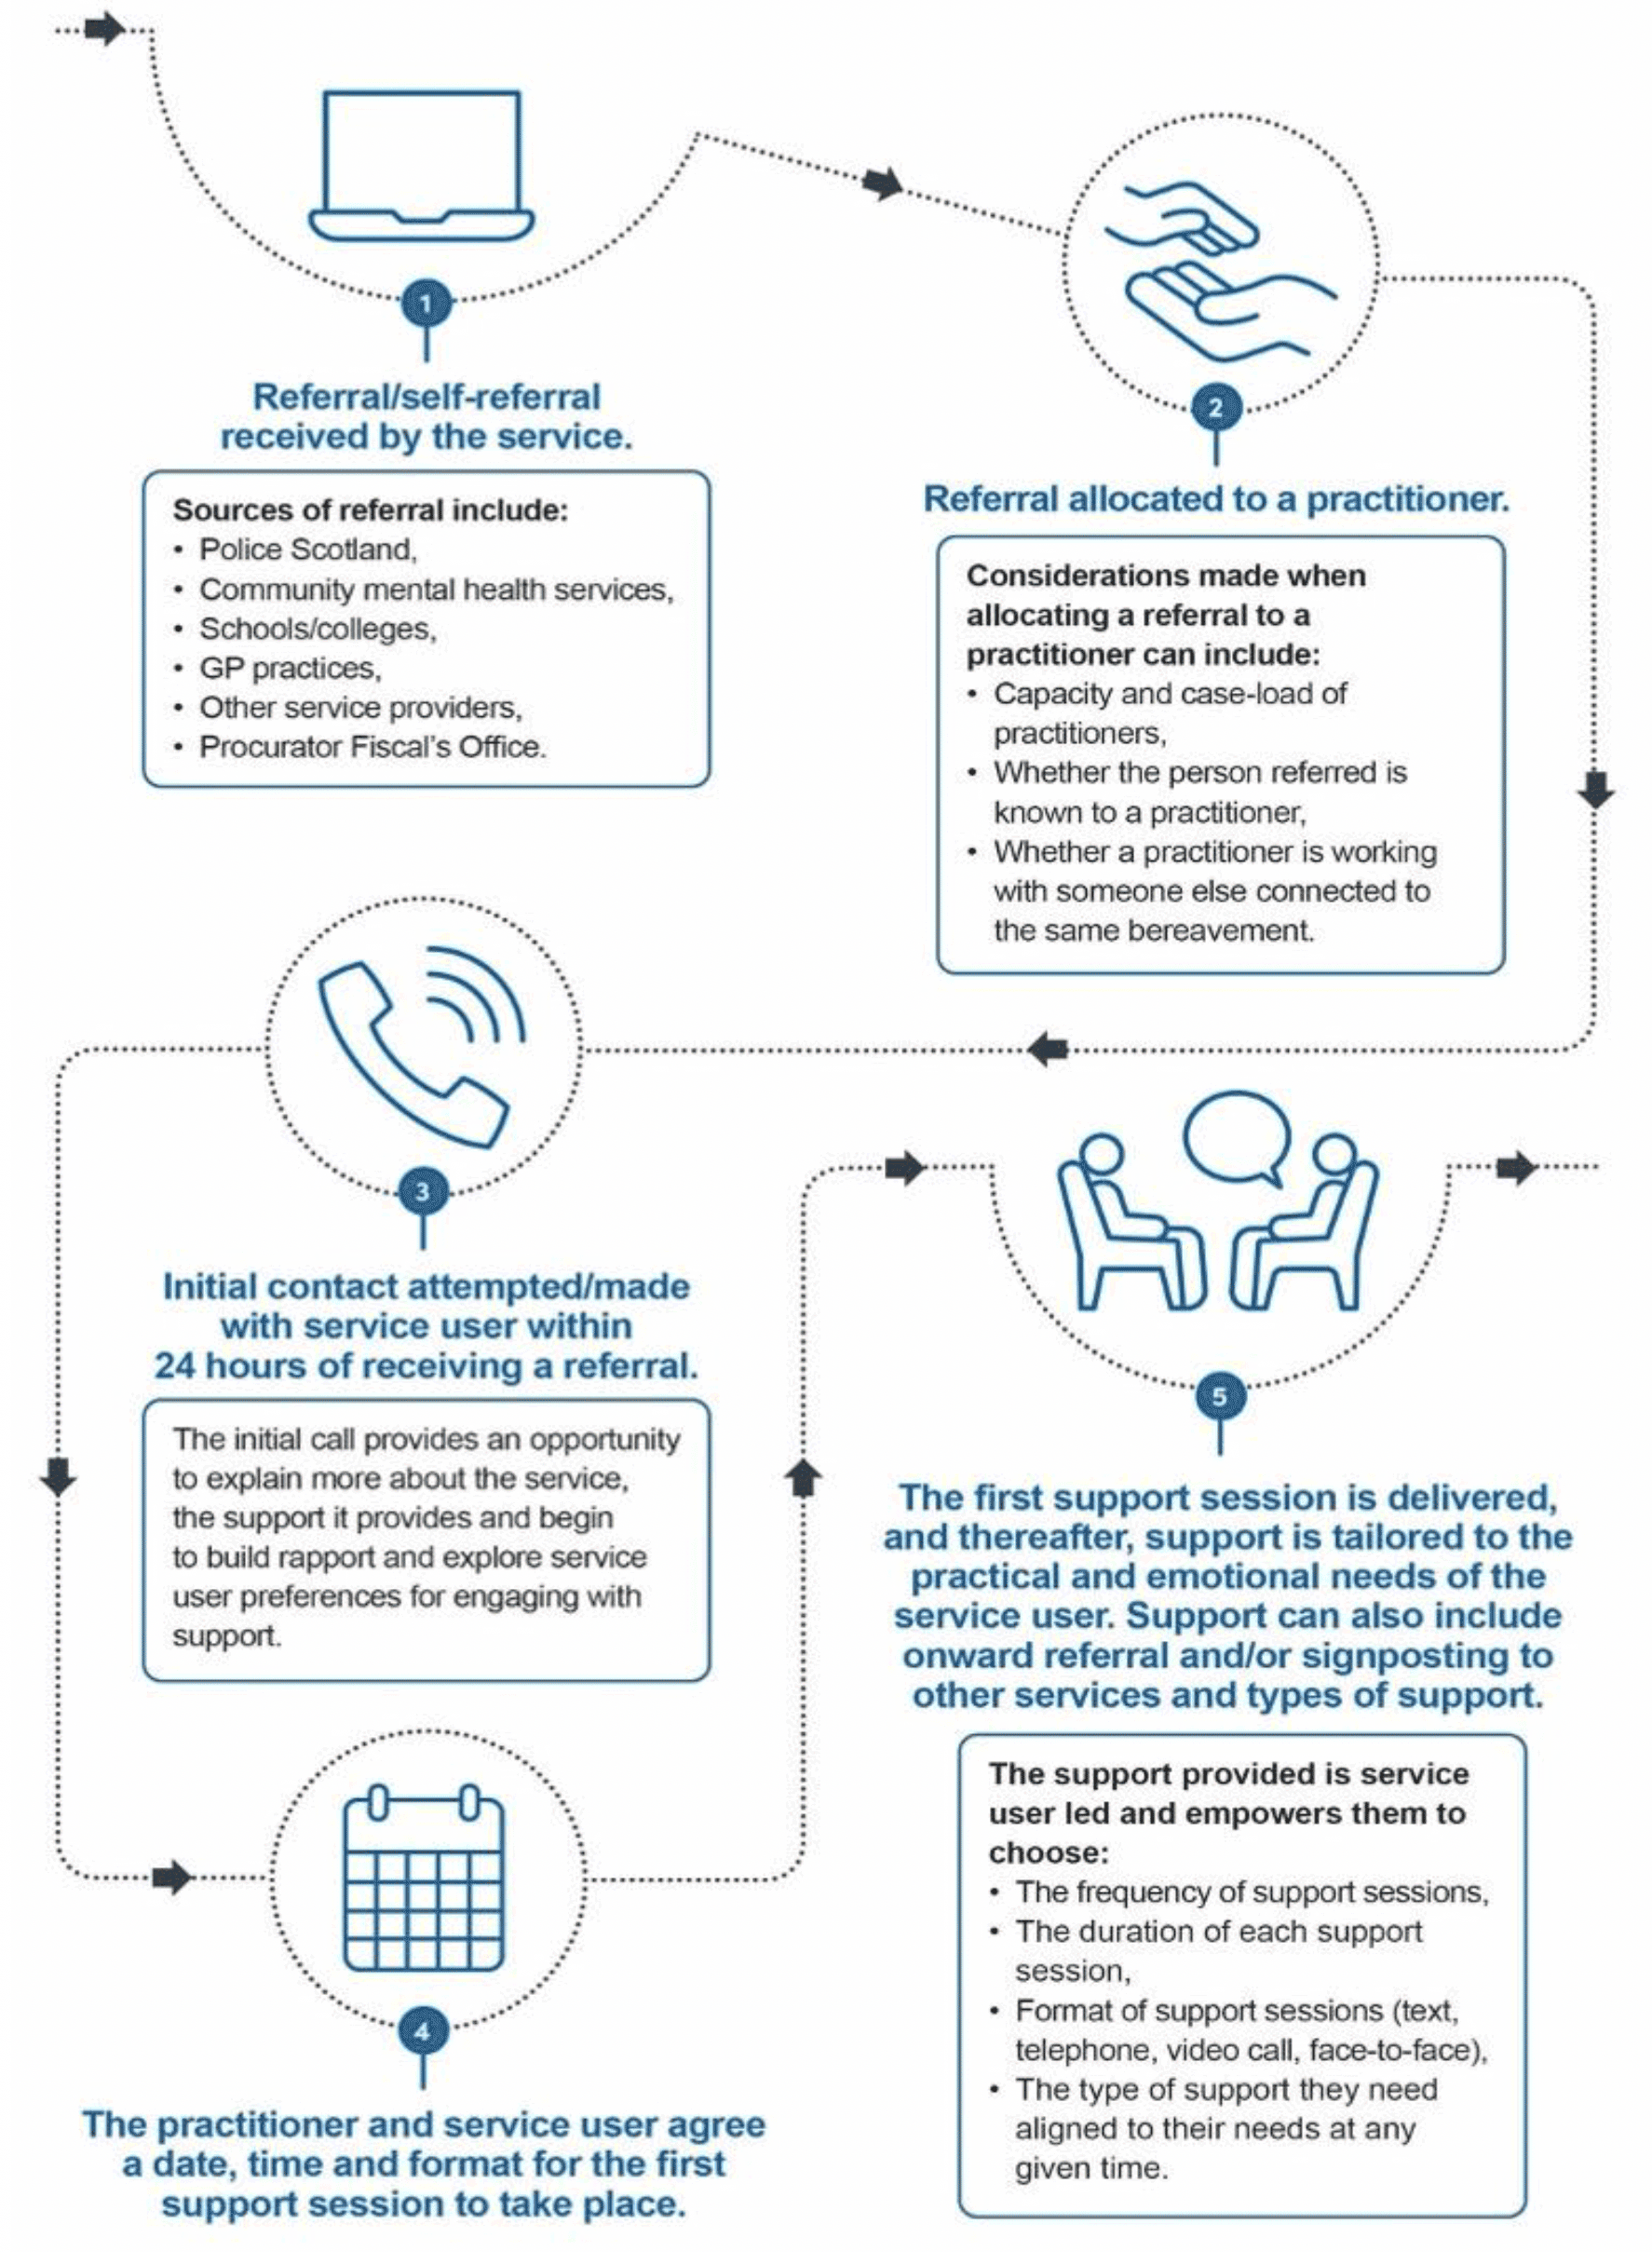 Infographic demonstrating the five core components of the service delivery model implemented in both pilot areas.